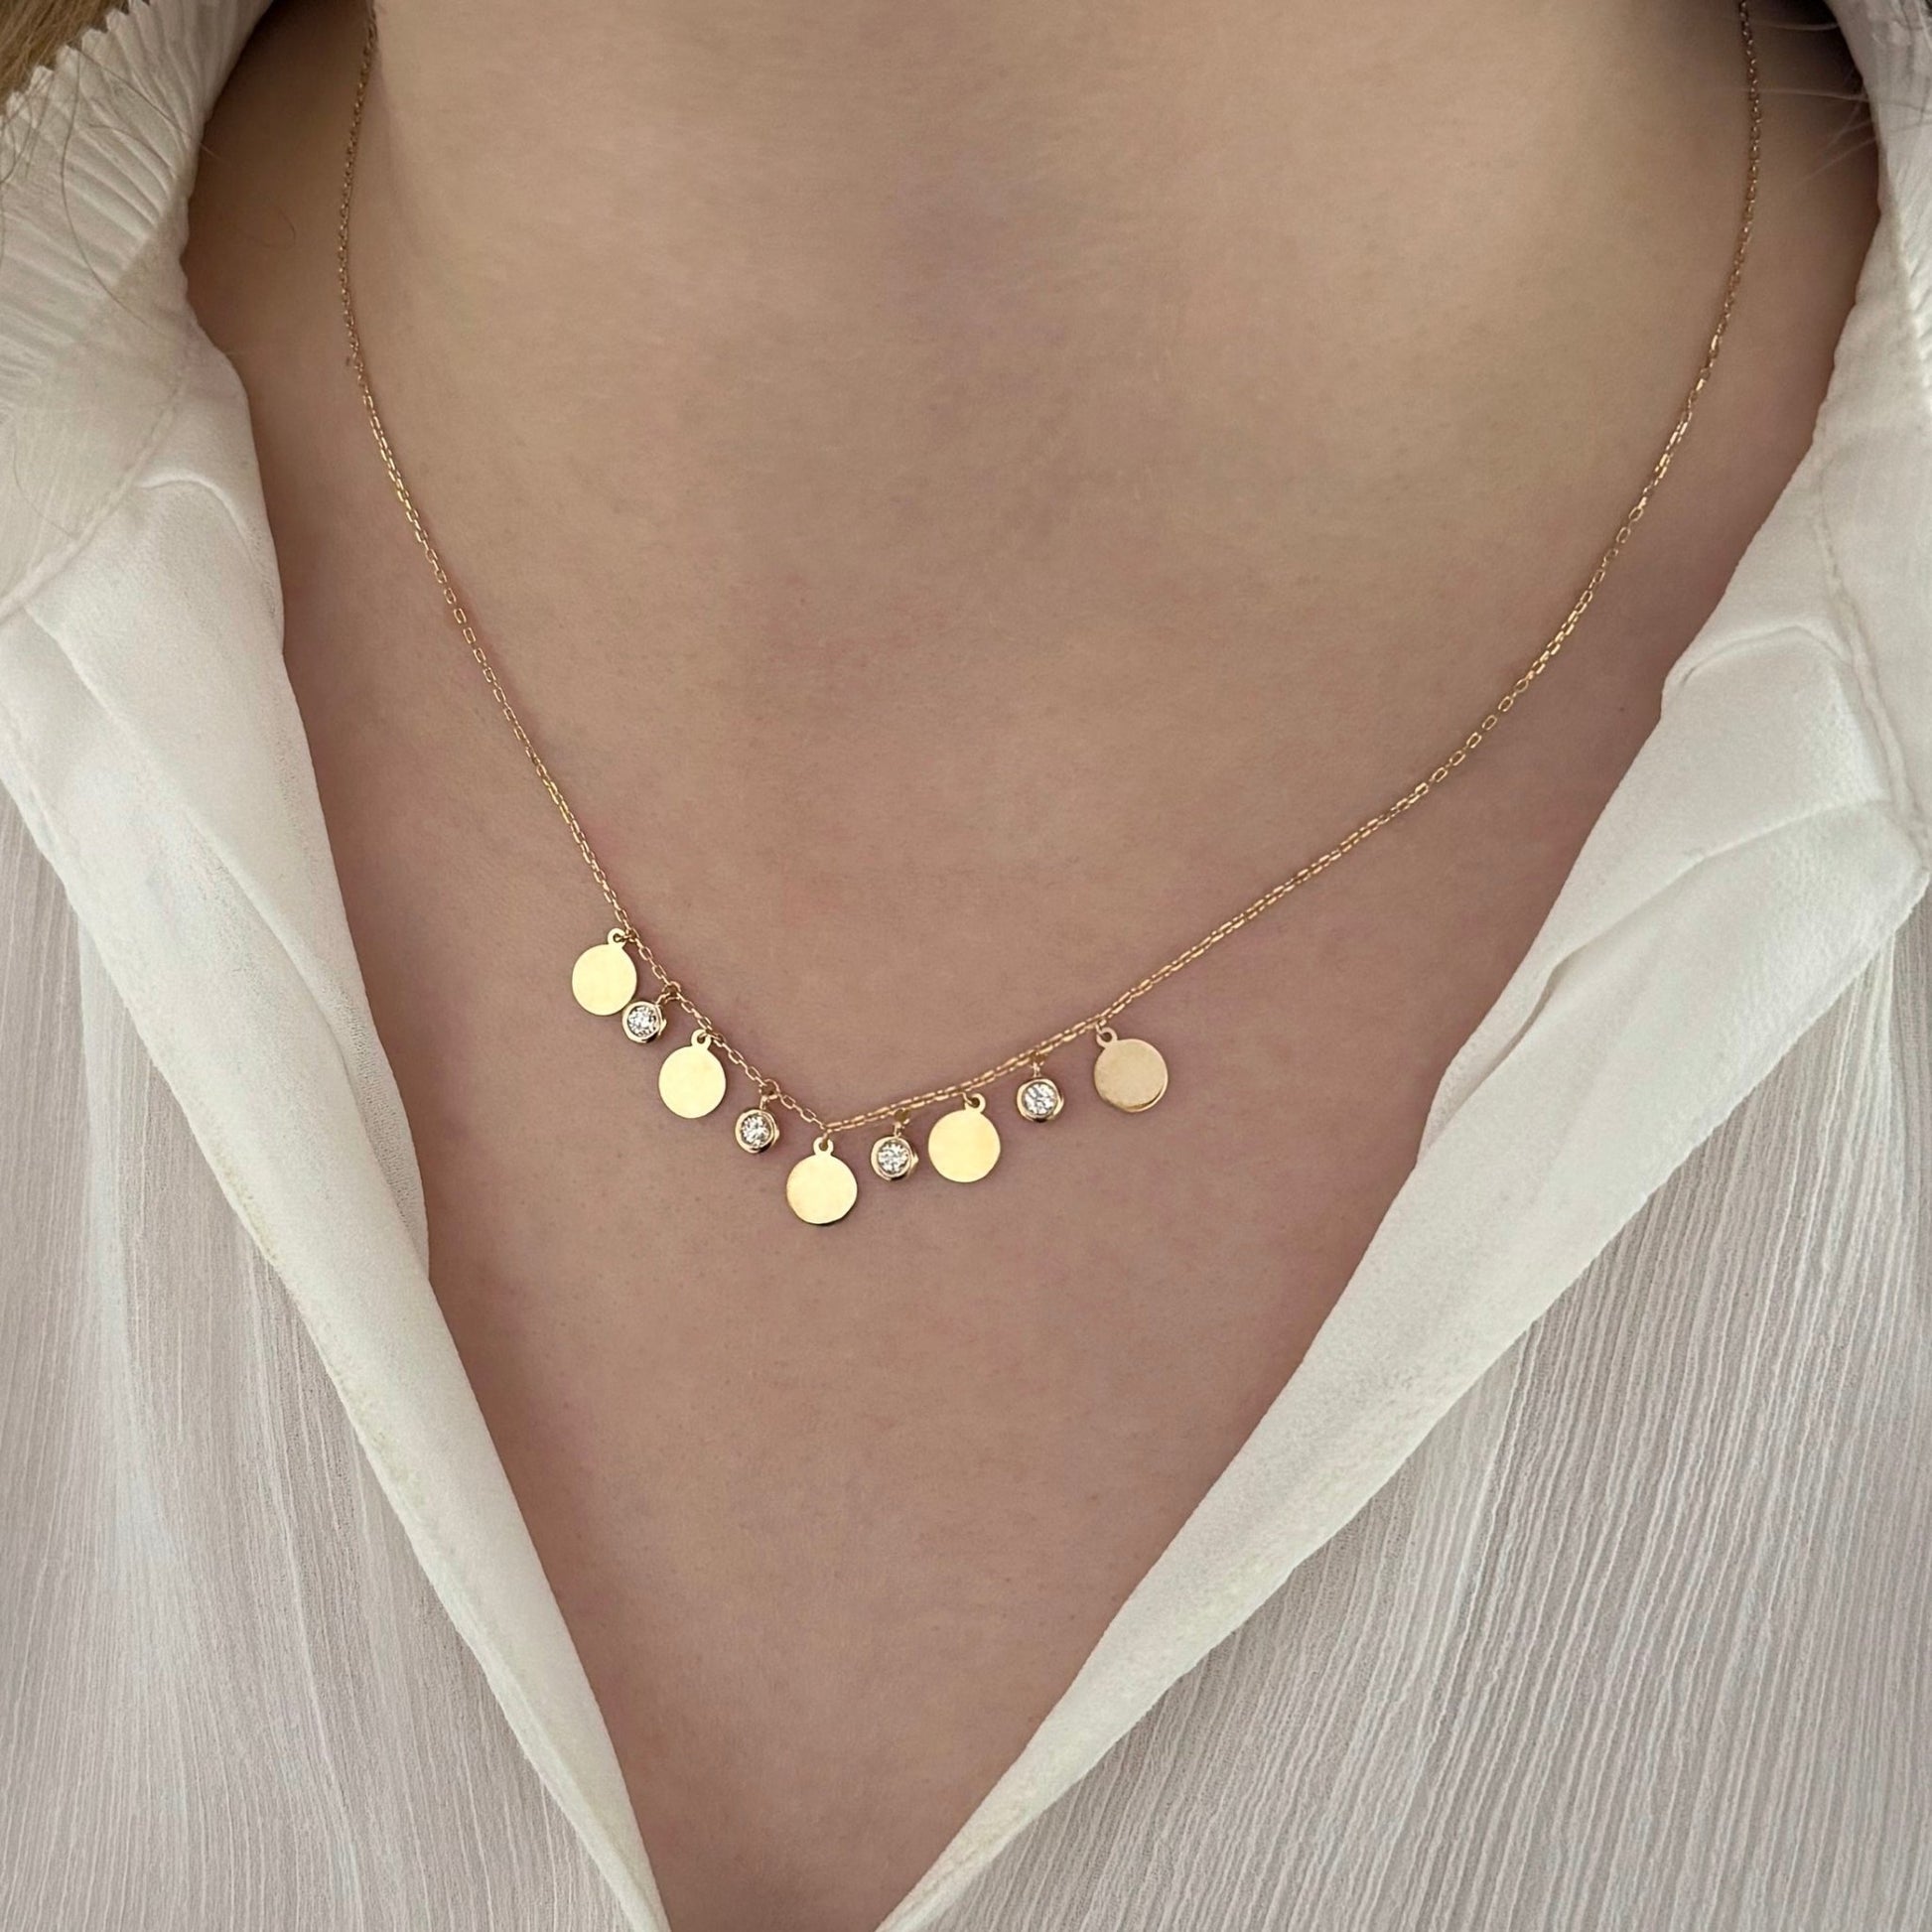 Aura Necklace in Diamond - 18k Gold - Lynor